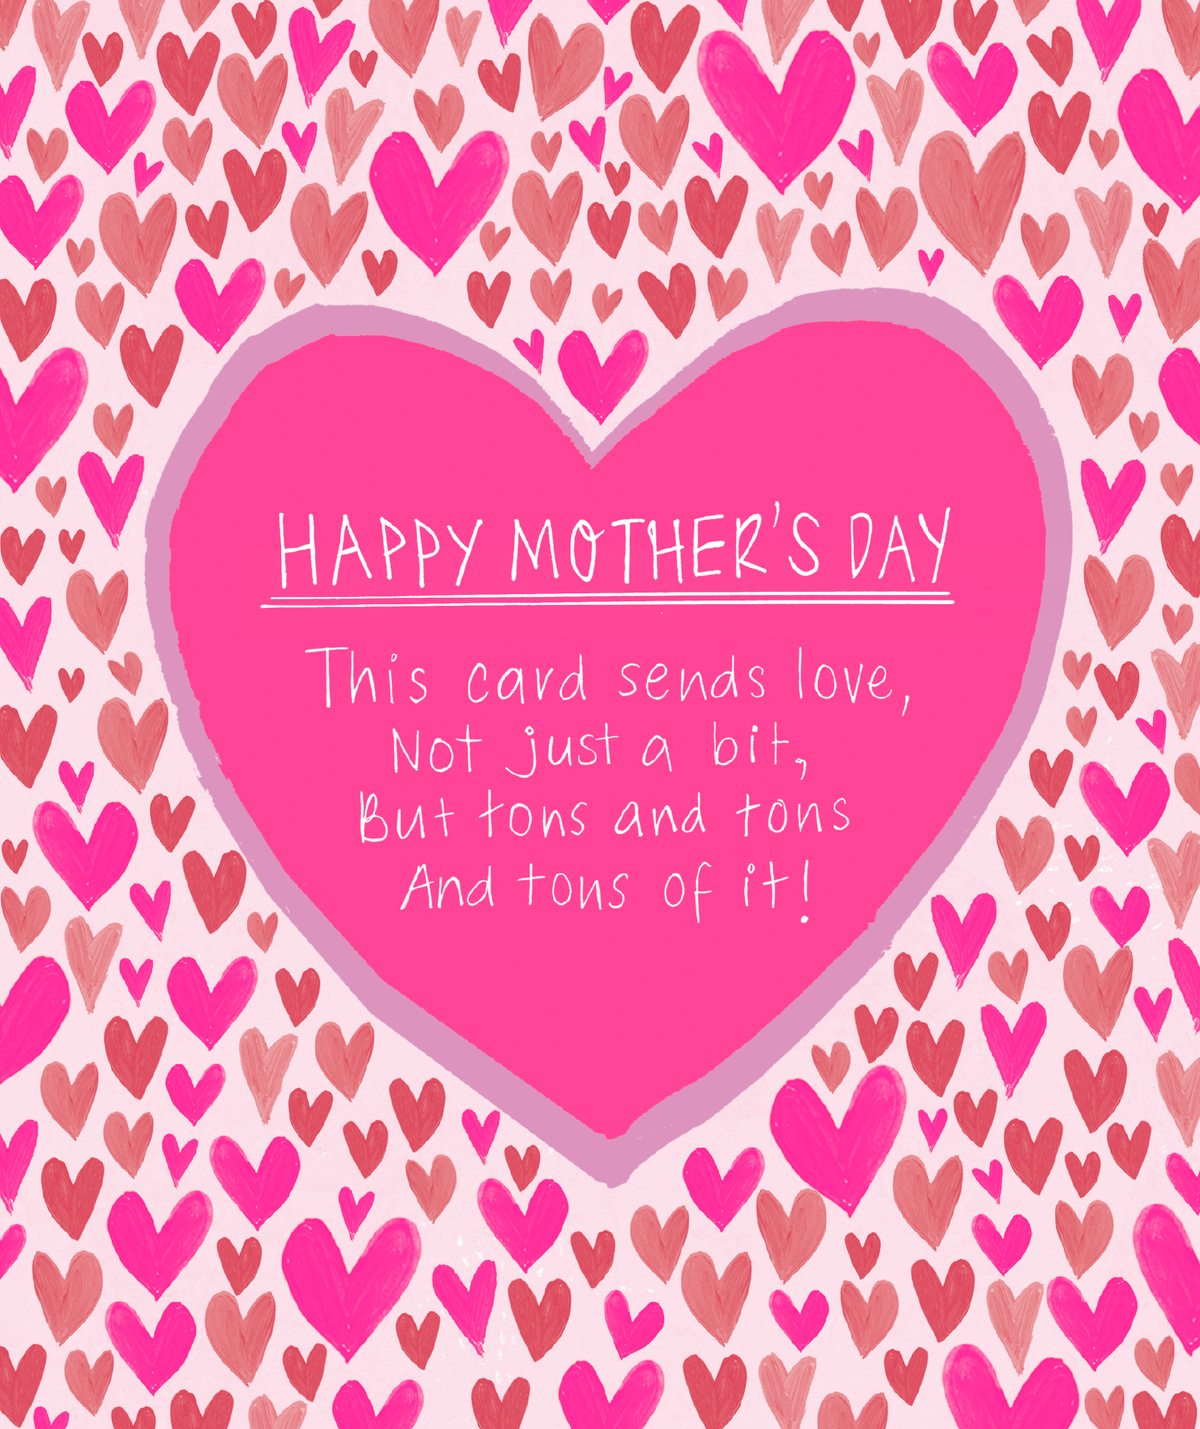 Tons of It Sweet Poem Mother&#39;s Day Card by penny black